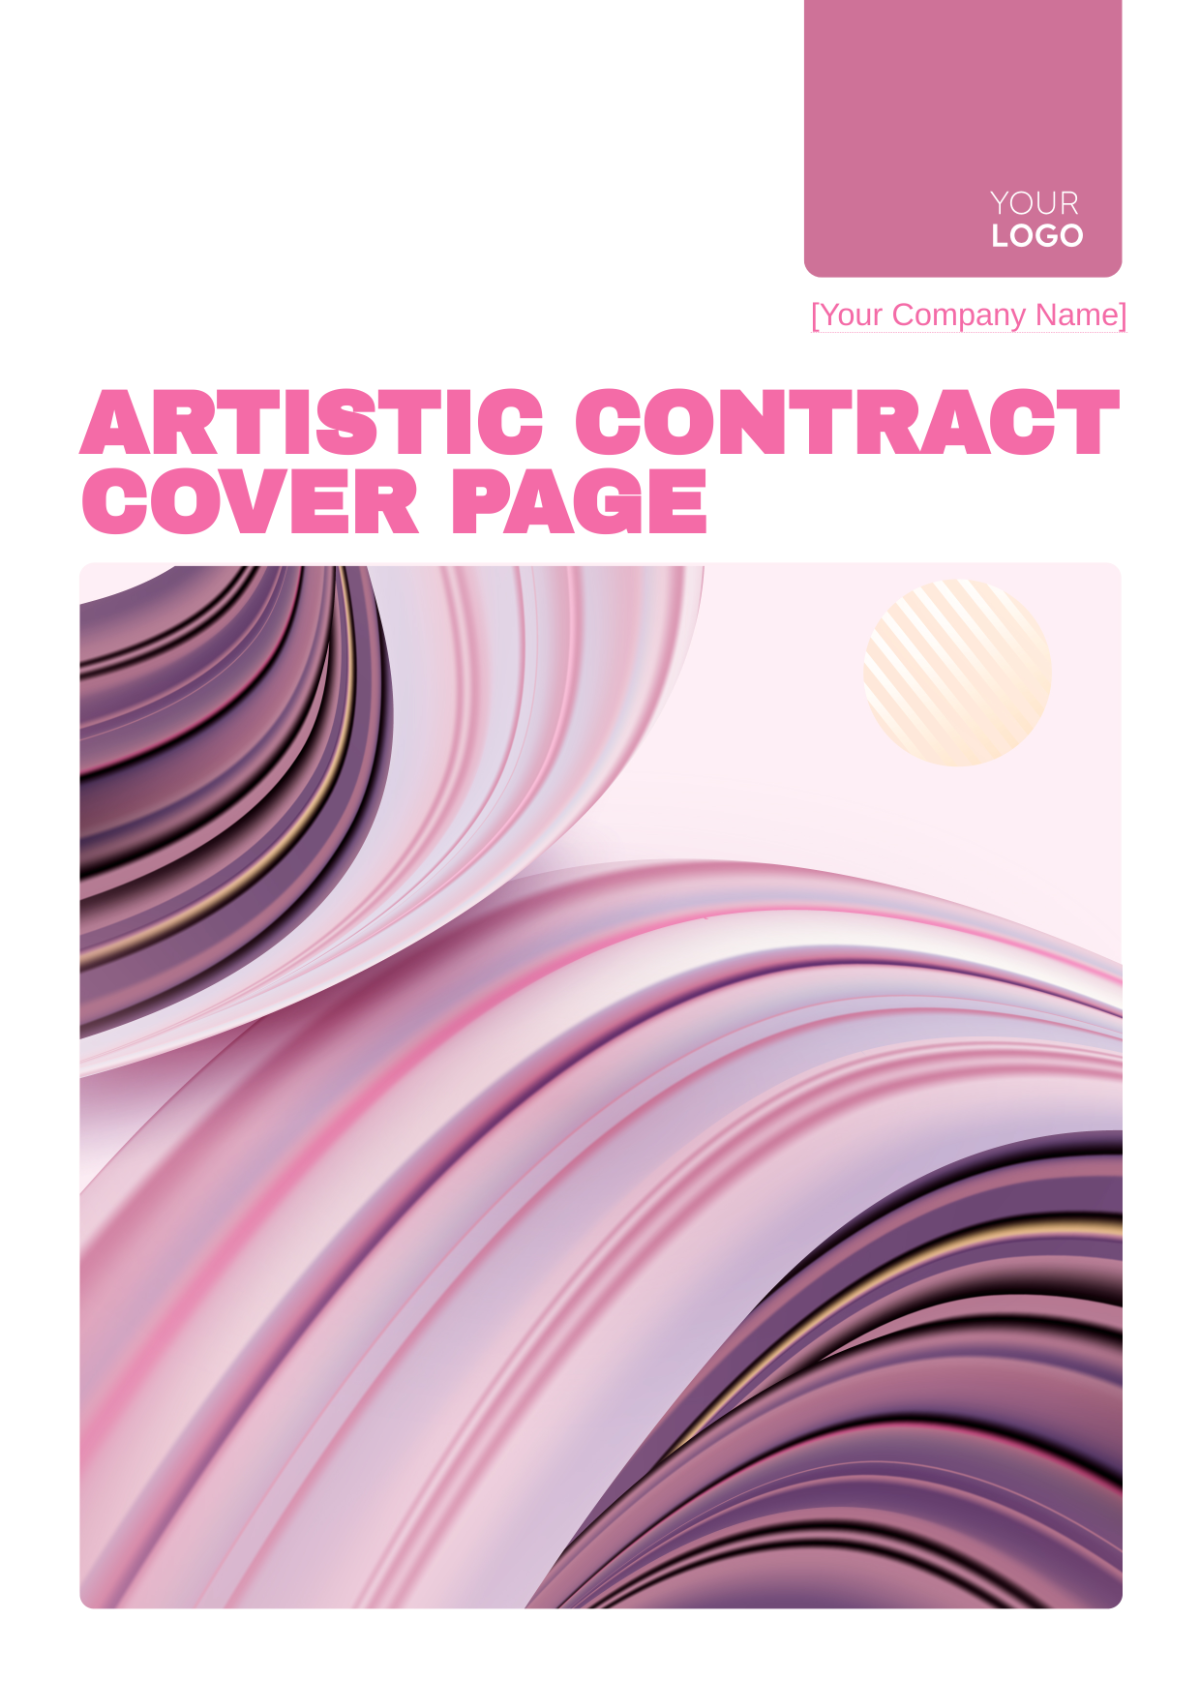 Artistic Contract Cover Page Template